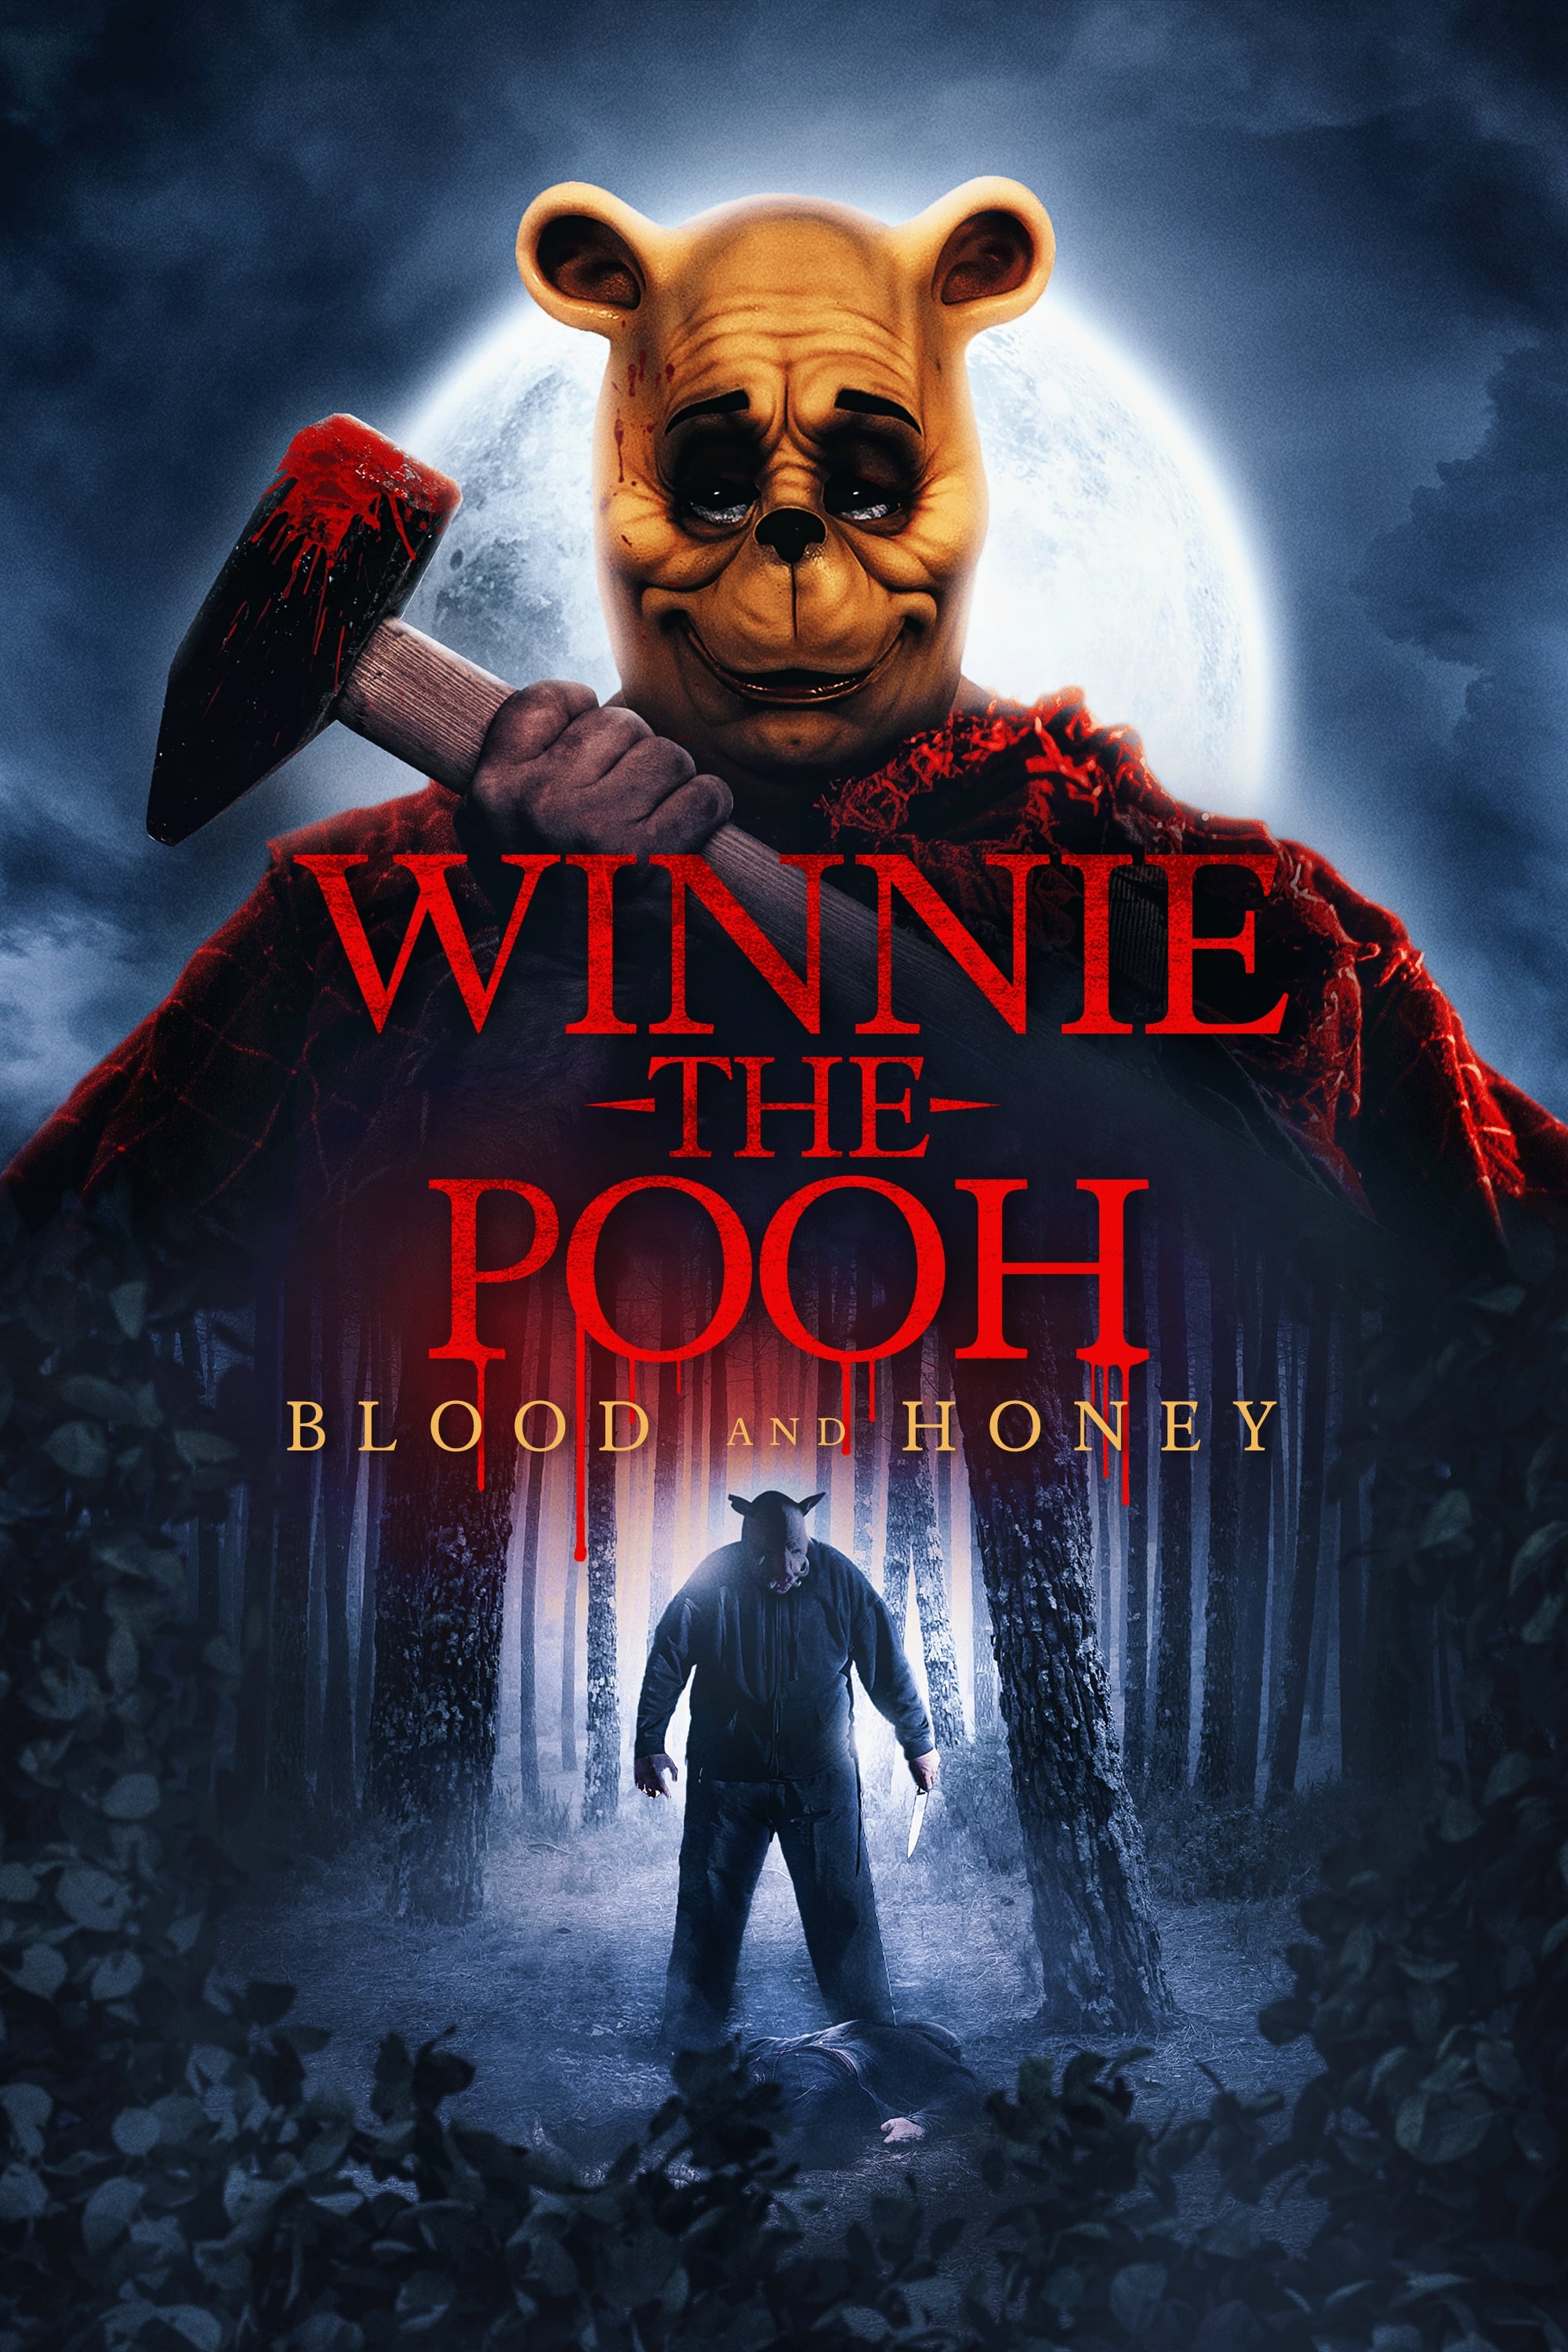 Winnie the Pooh: Blood and Honey film